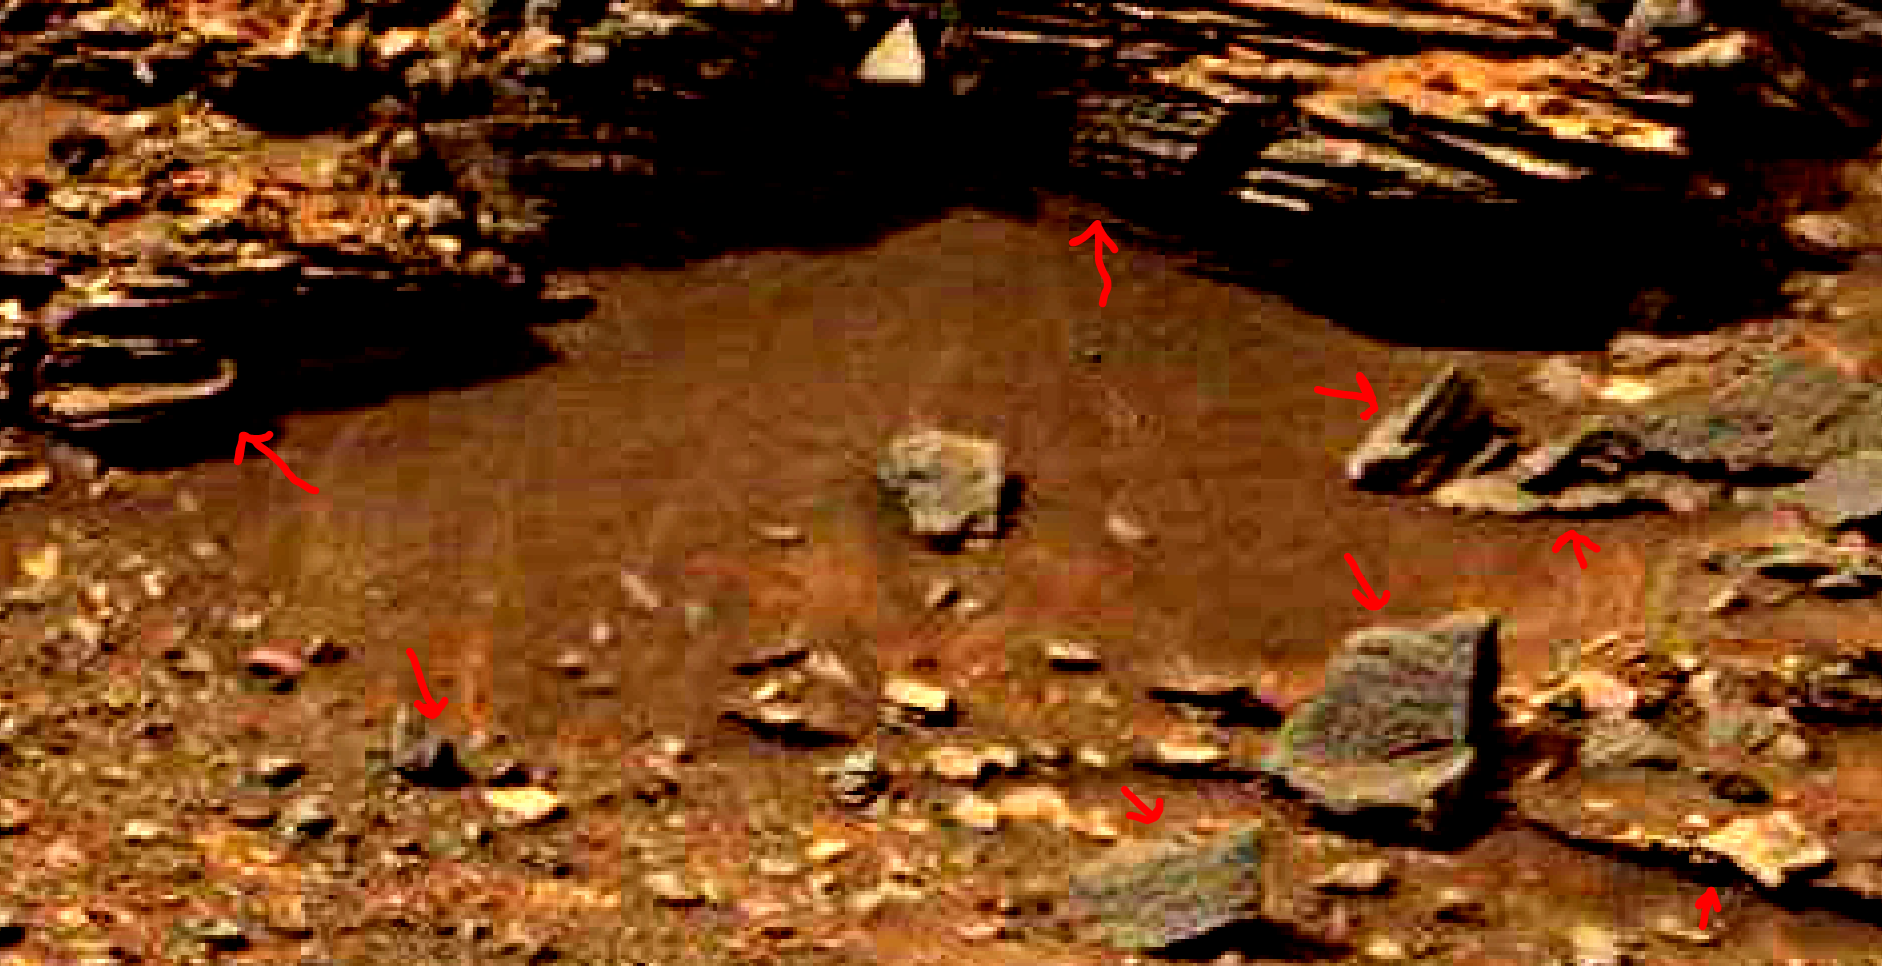 mars-sol-1463-anomaly-artifacts-24-was-life-on-mars